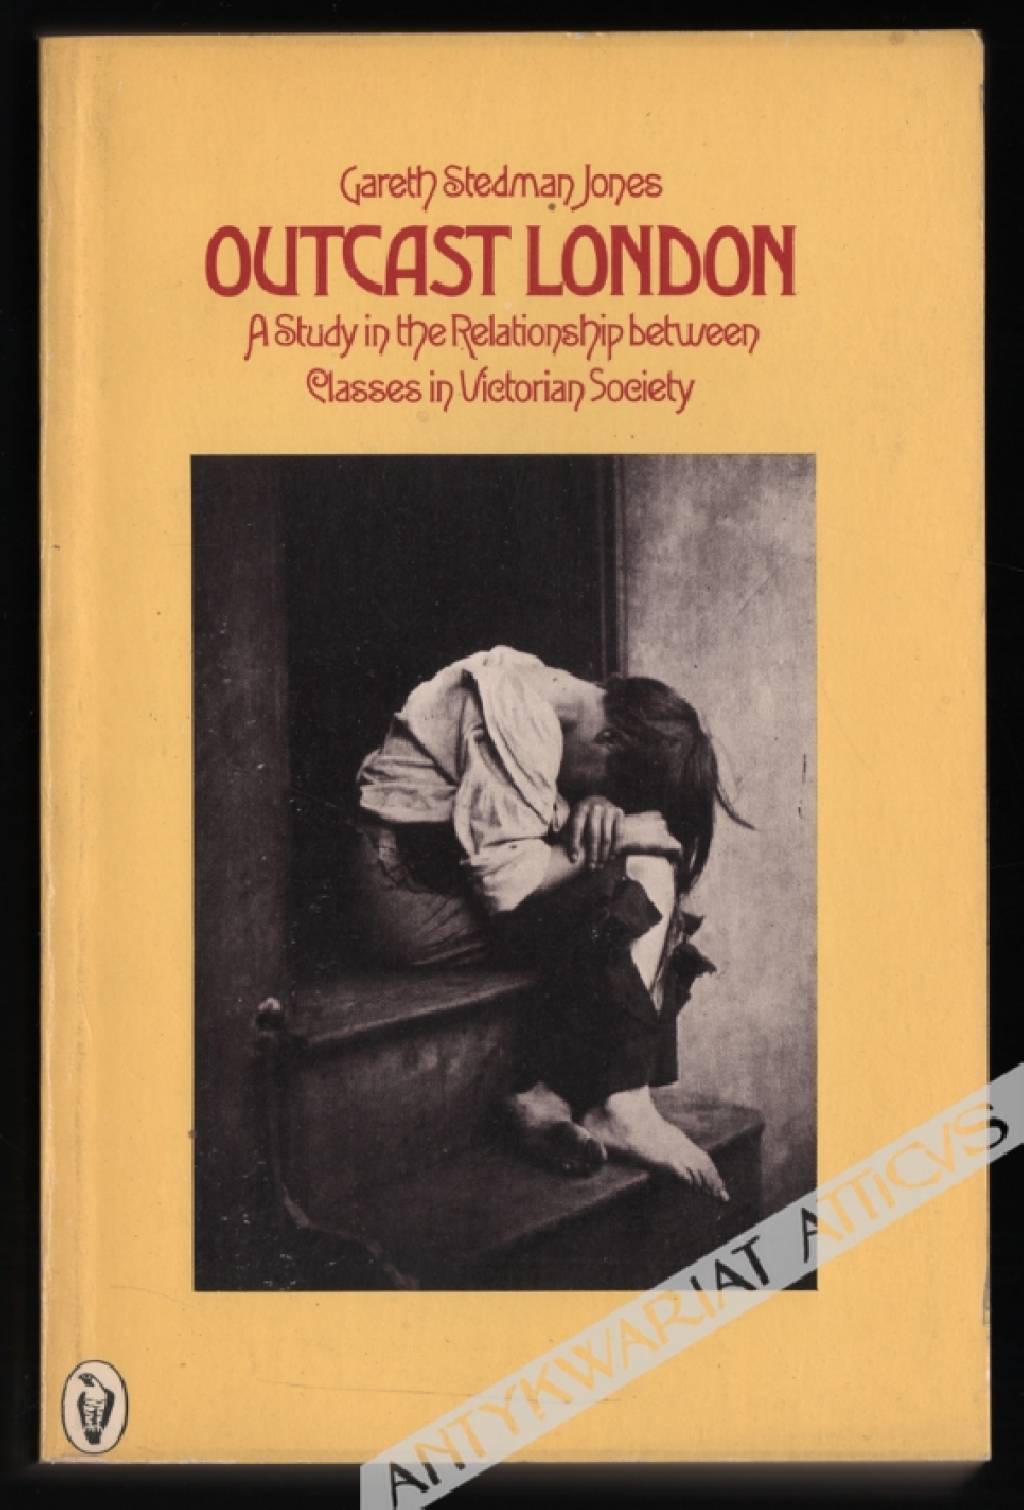 Outcast London. A Study in the Relationship between Classes in Victorian Society